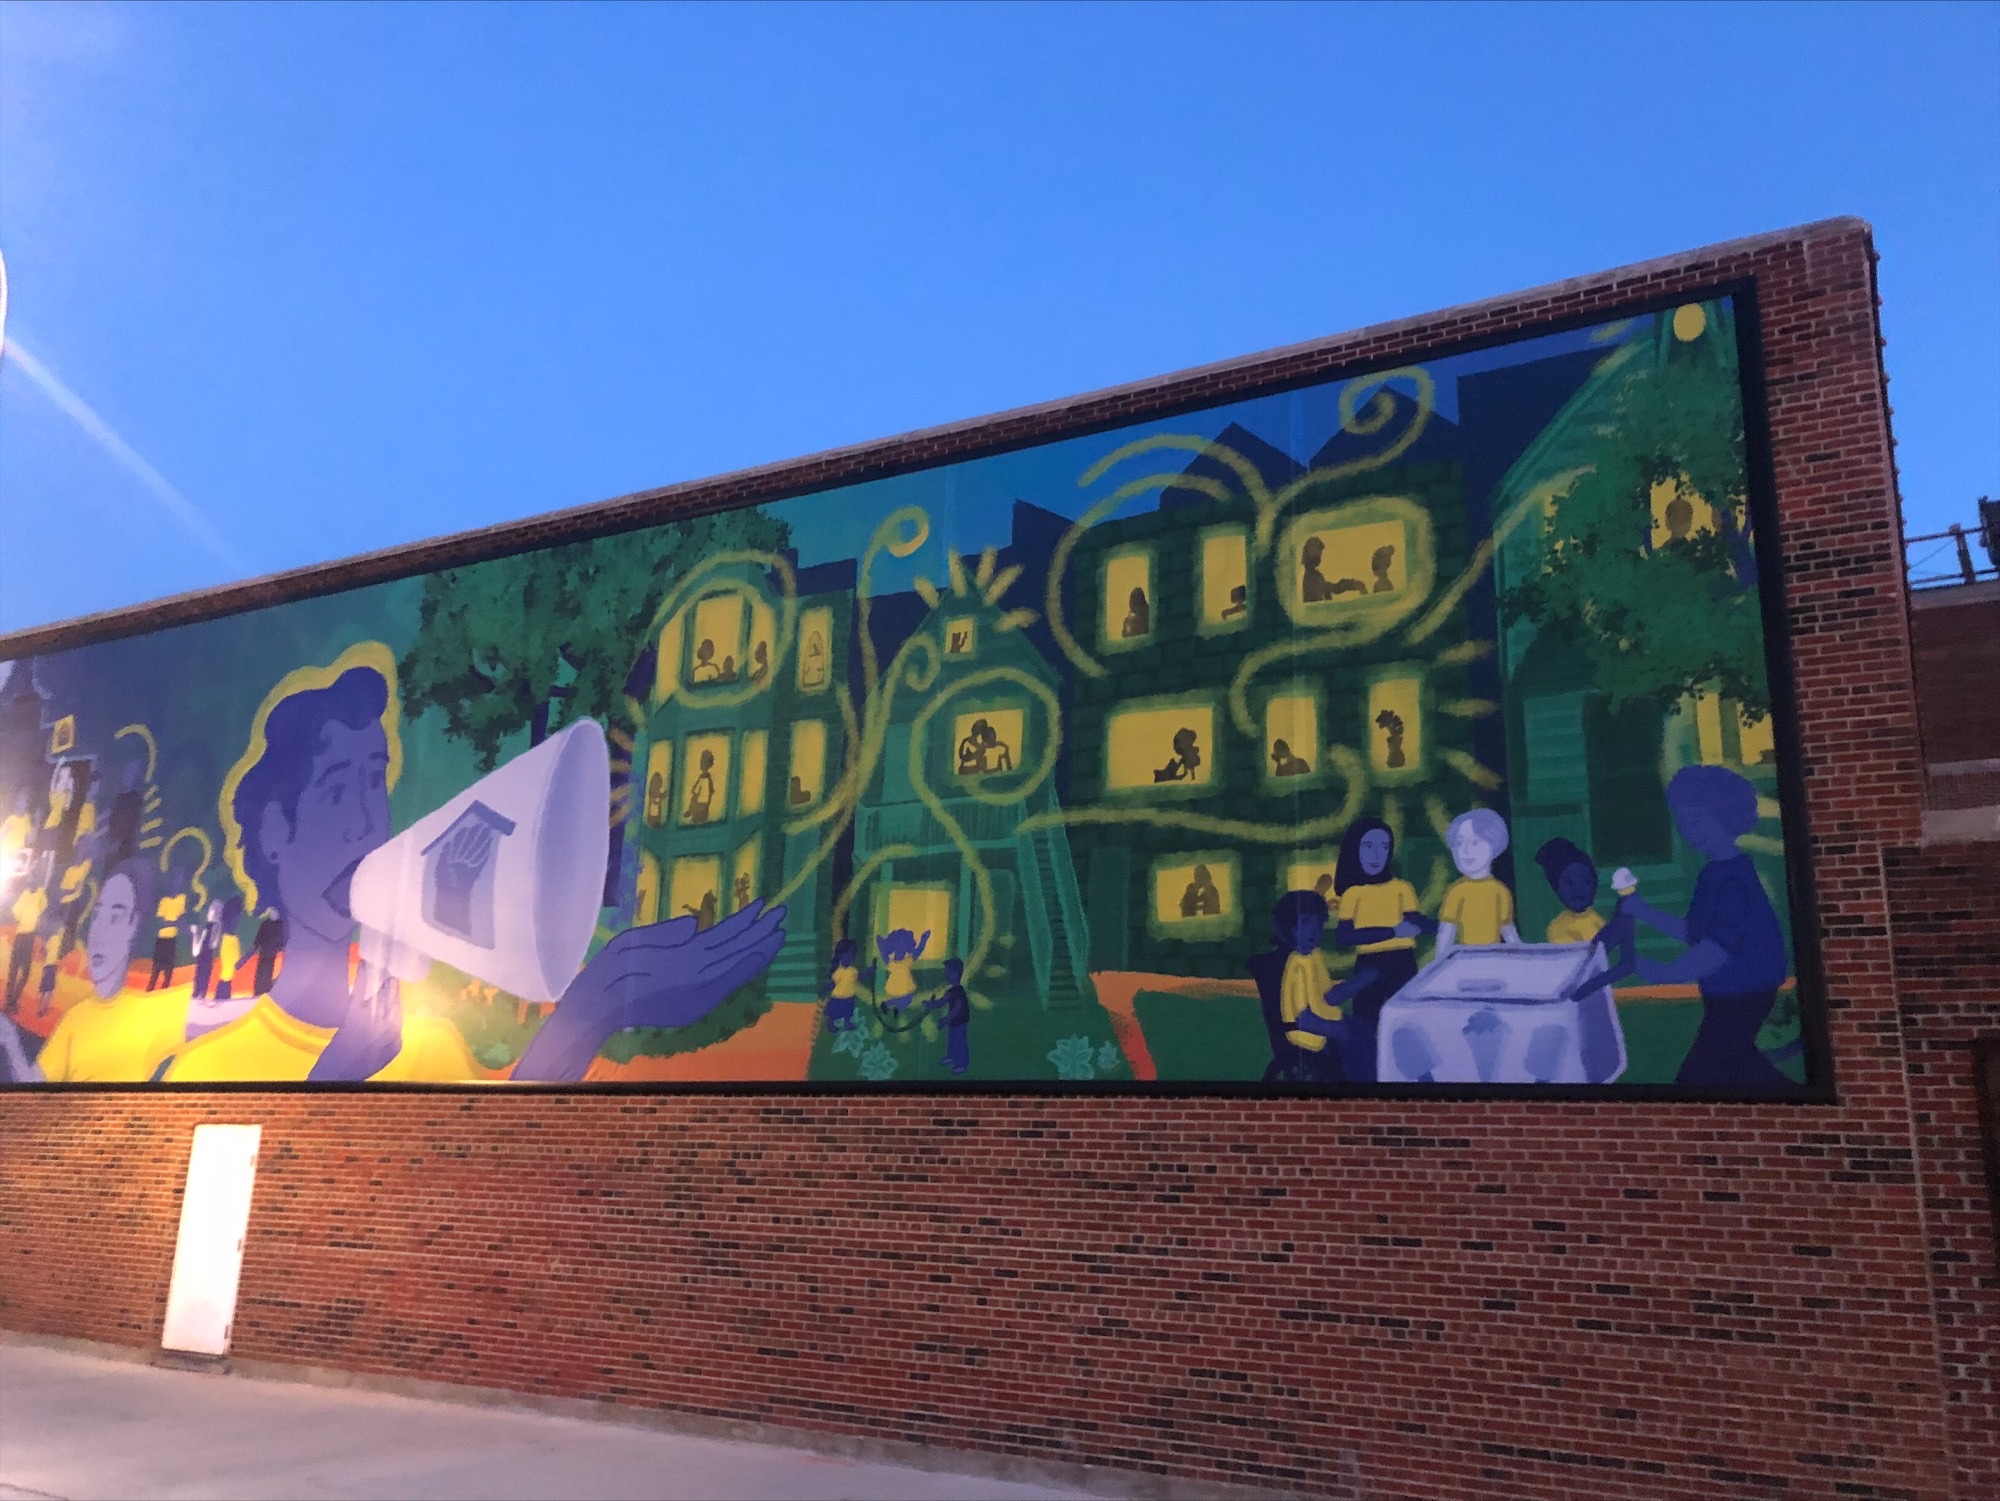 A brick building with a mural on it. The mural features a person with a megaphone speaking to a series of houses whose residents are in their windows. 